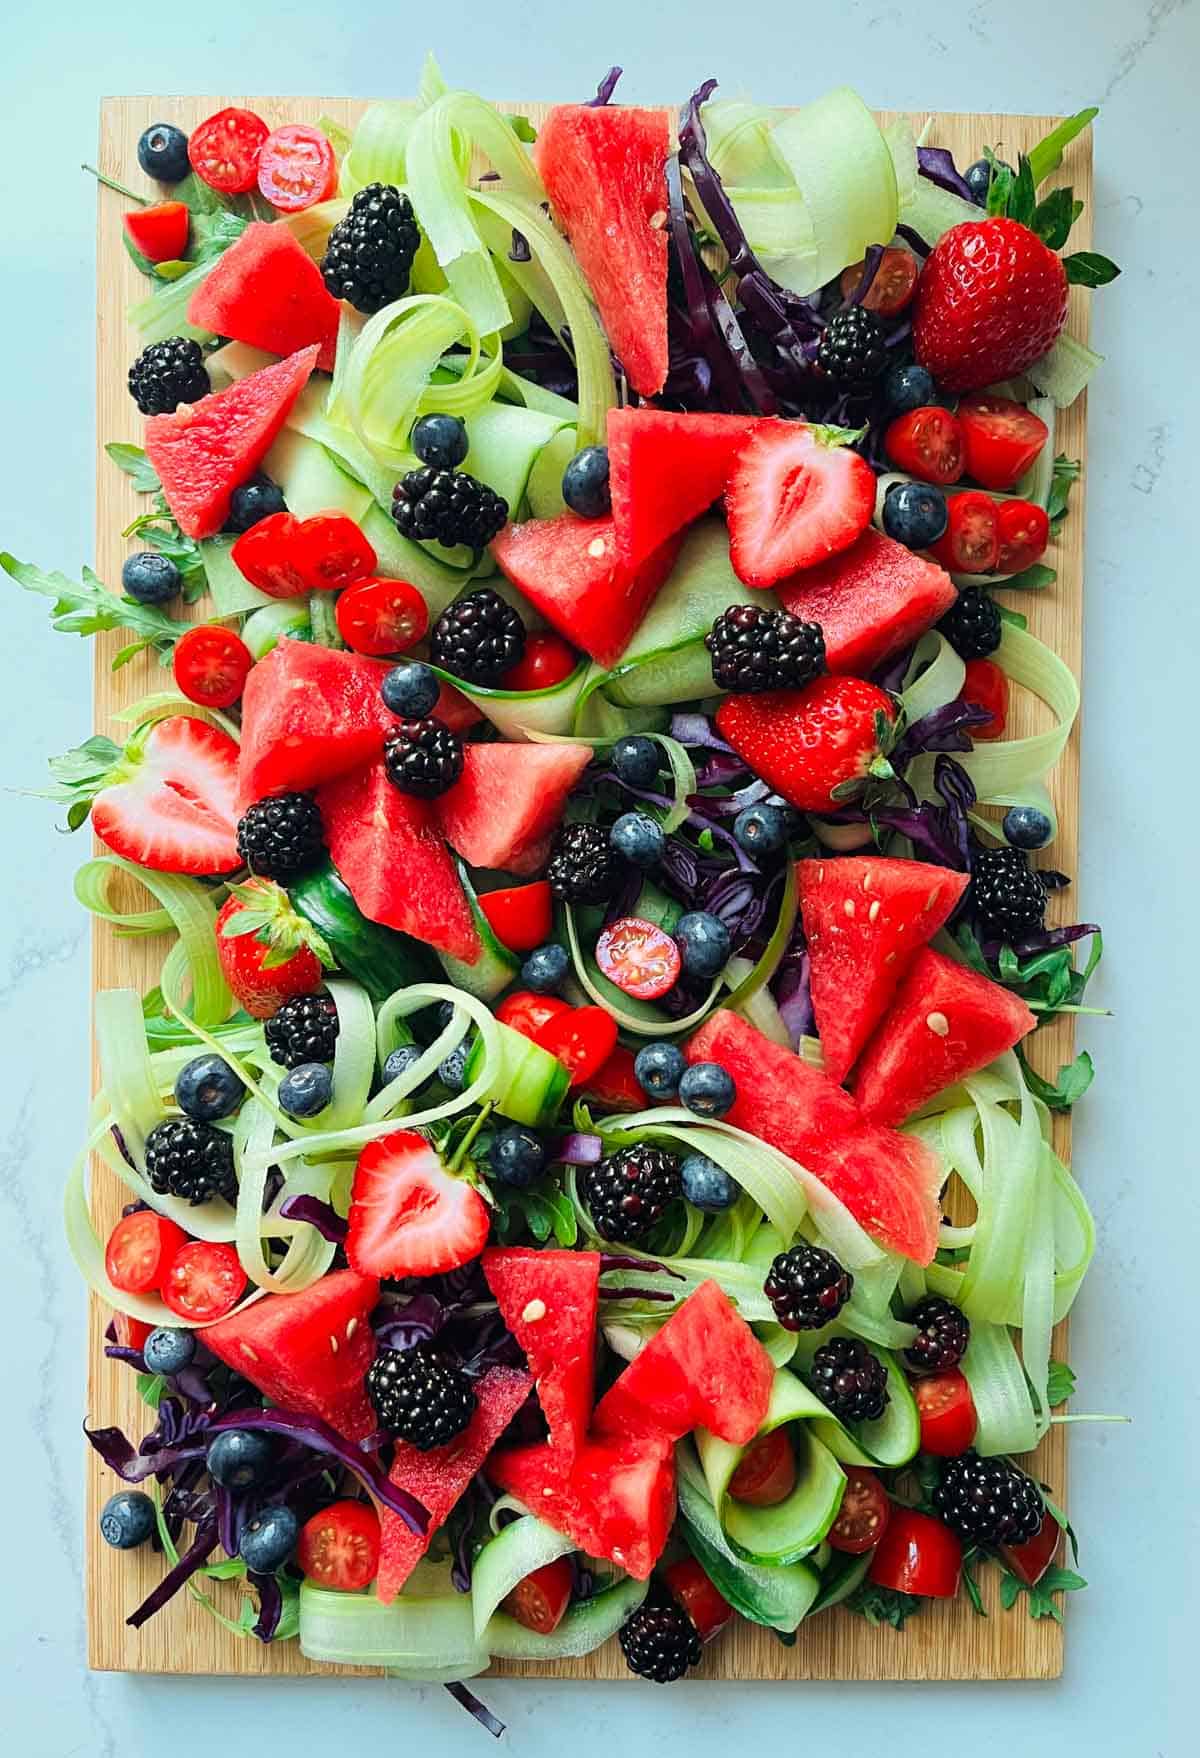 Rocket leaves, chopped red cabbage, celery and cucumber ribbons, watermelon, strawberries, tomatoes, blackberries and blueberries on a wooded board.